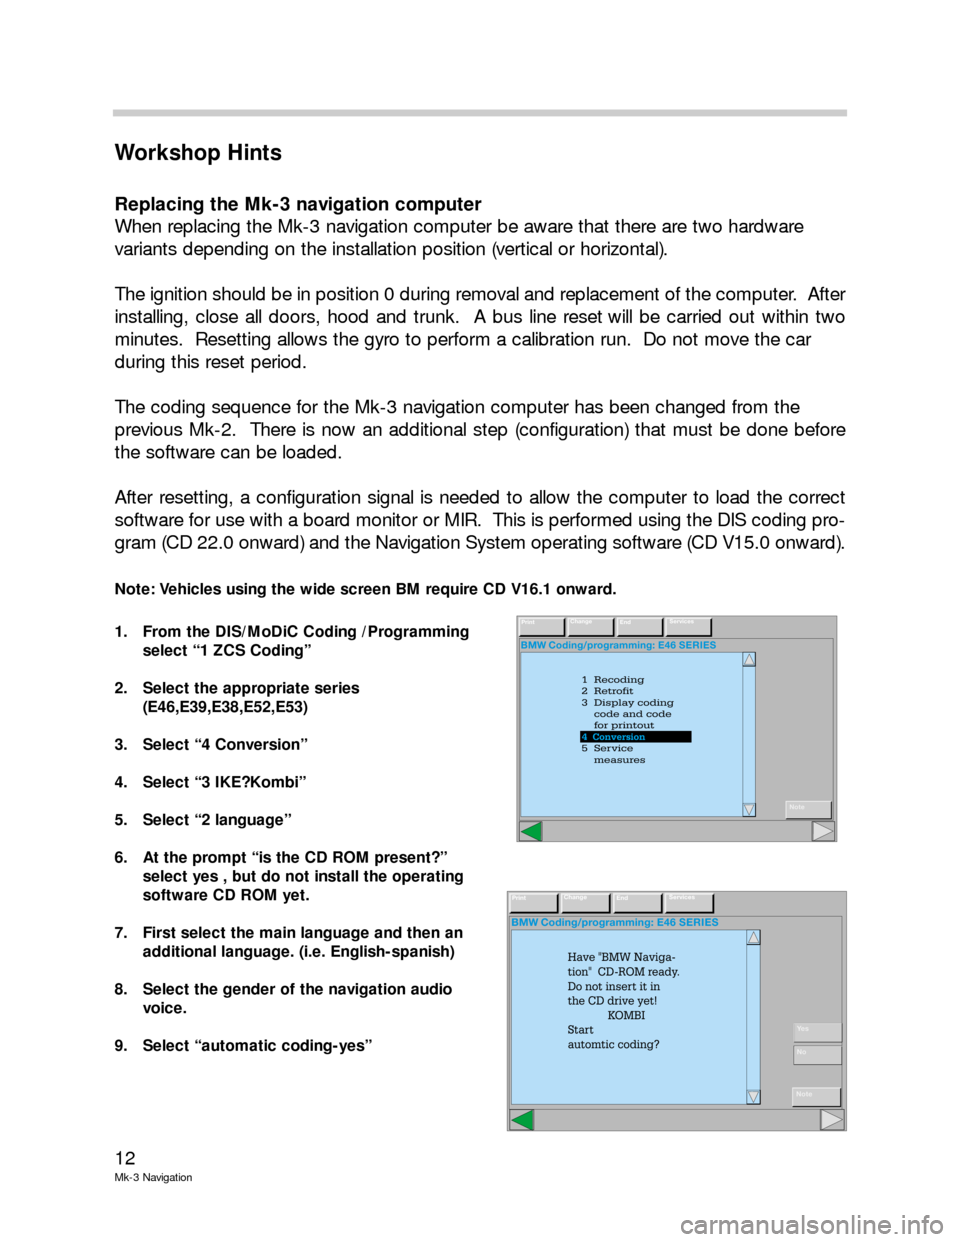 BMW Z8 2000 E52 Mk3 Navigation System Manual 12
Mk-3 Navigation
Workshop Hints
Replacing the Mk-3 navigation computer
When replacing the Mk-3 navigation computer be aware that there are two hardware 
variants depending on the installation positi